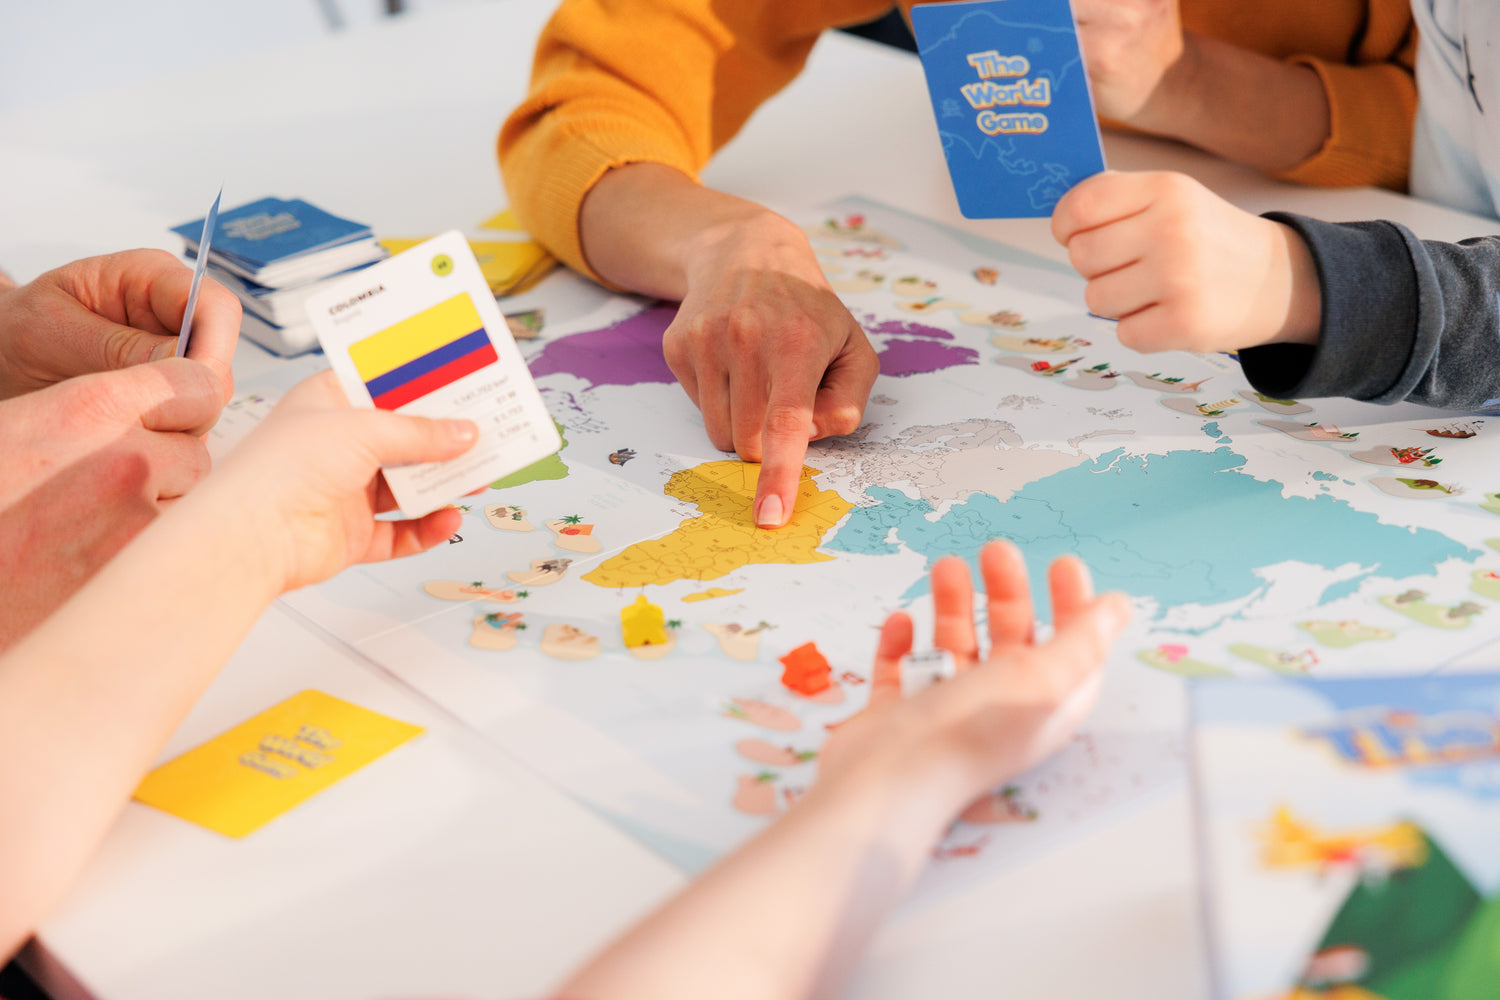 the world game geography games geography board game world map country cards flags capital cities learn about the world continents country flash cards educational geography board game for teenagers family kids great learning gift for kids and families